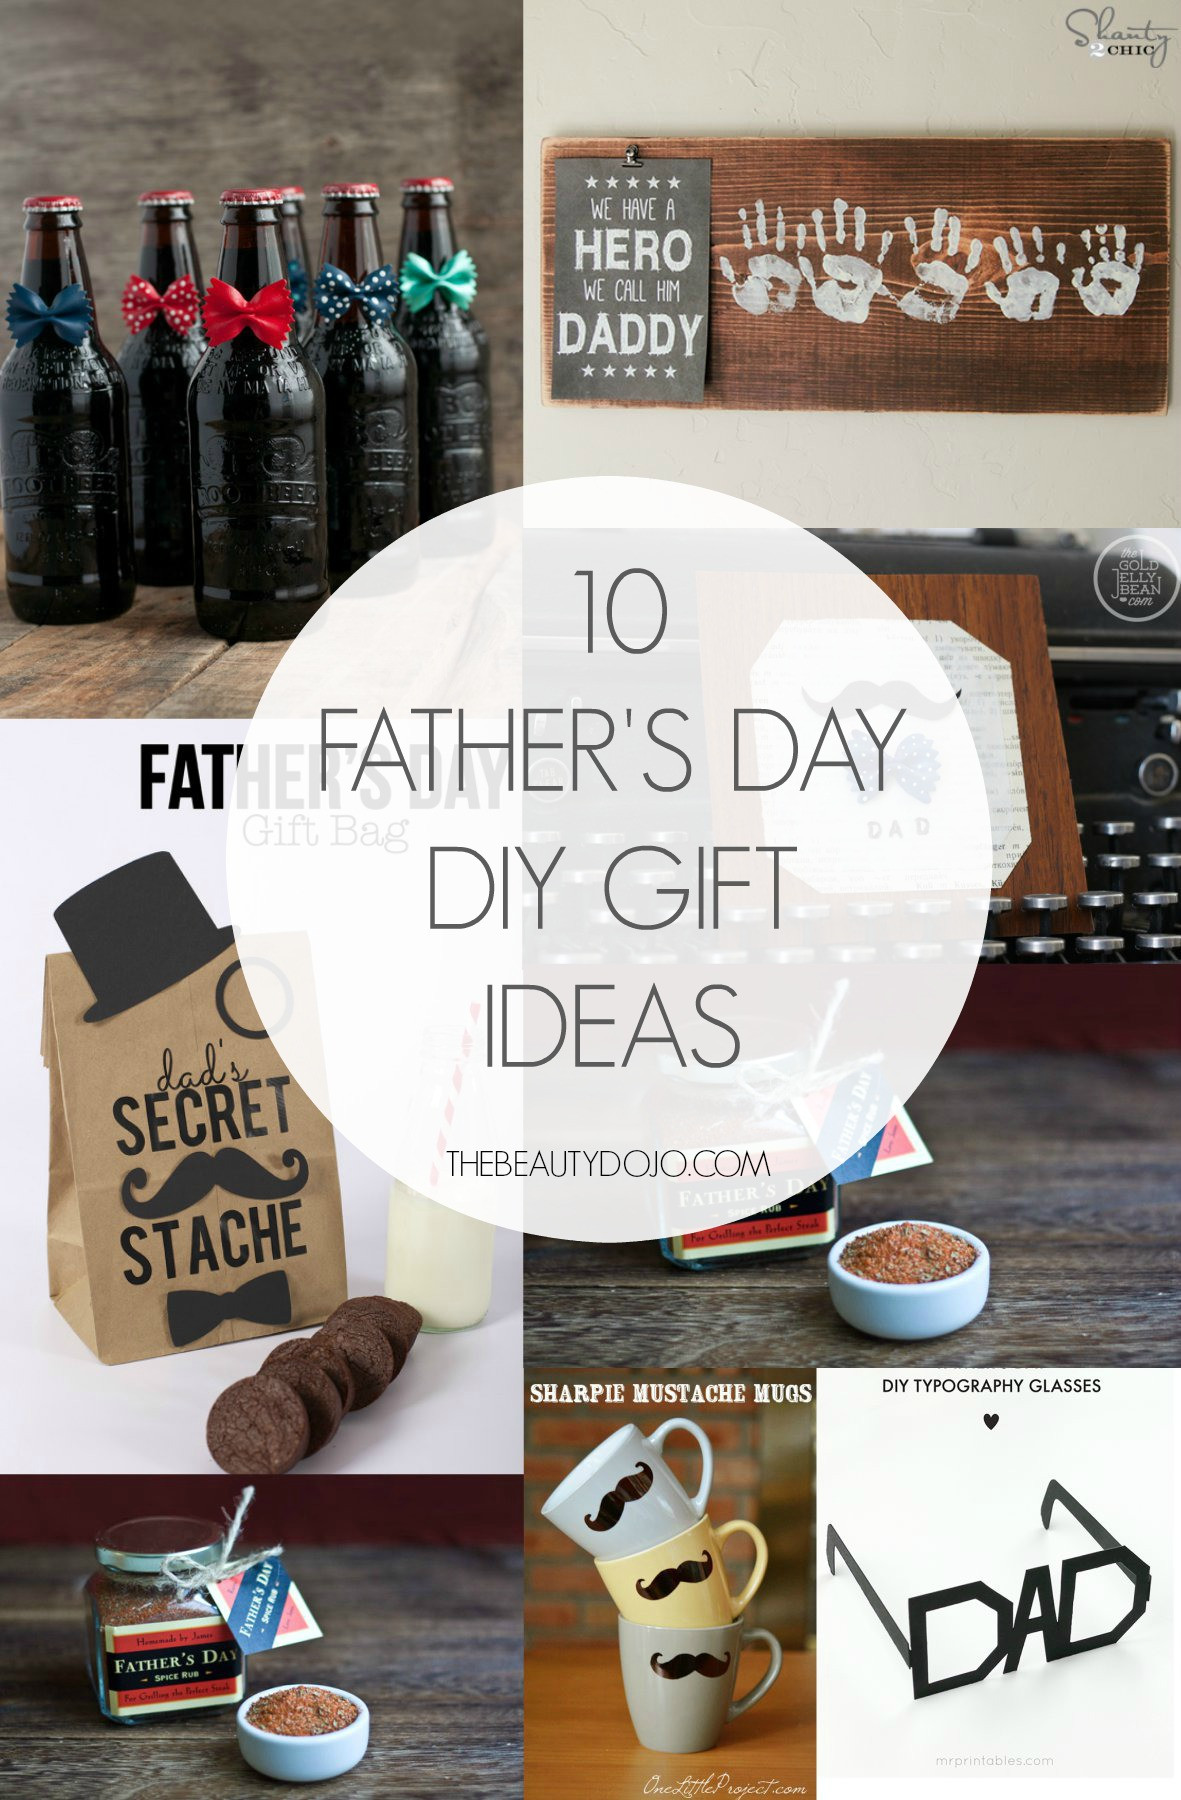 Father'S Day Gift Ideas From Wife
 10 Father s Day DIY Gift Ideas The Beautydojo